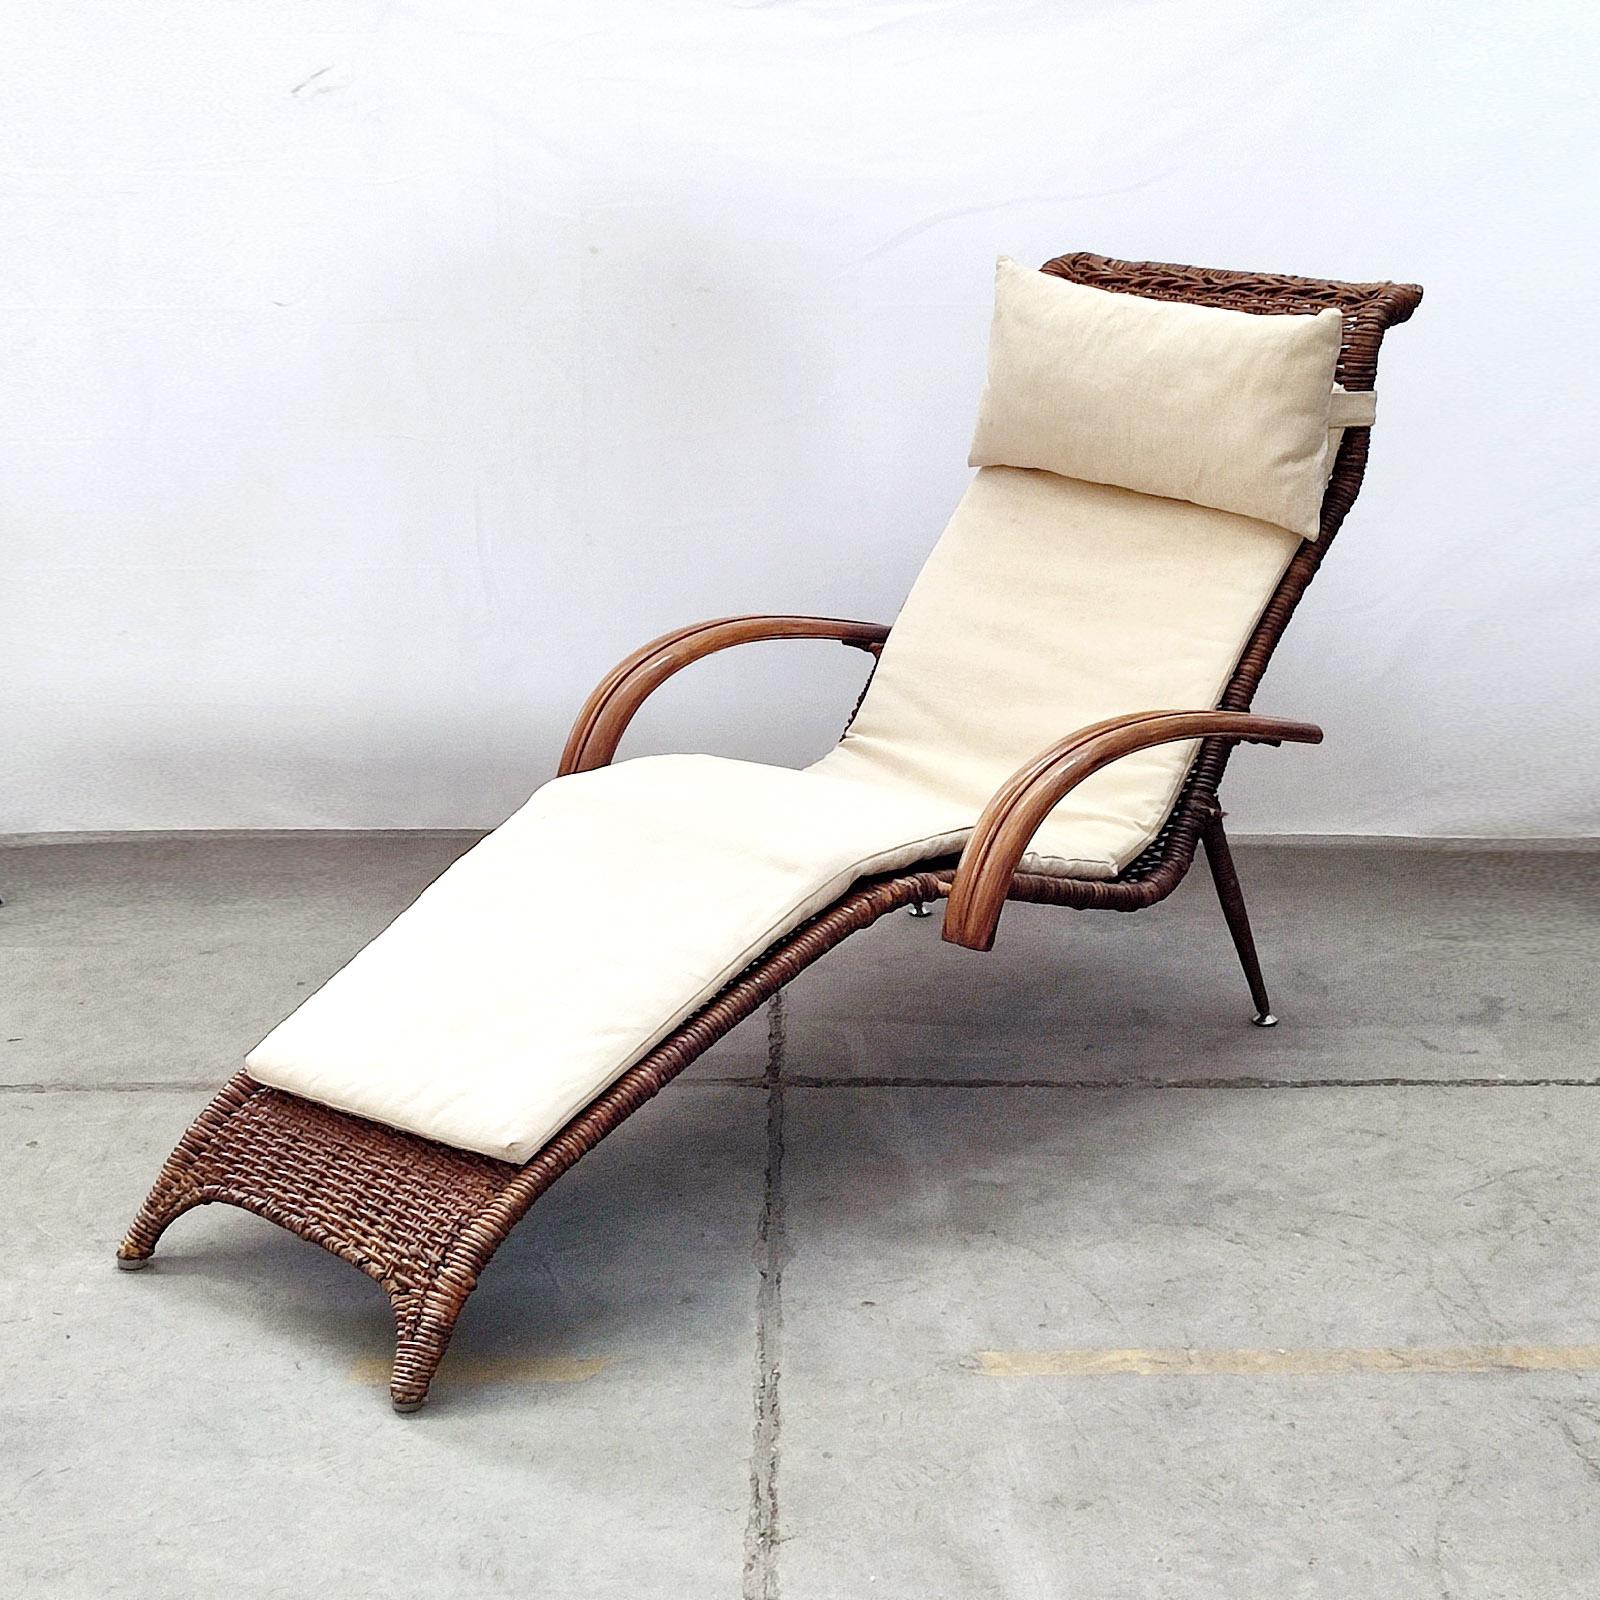 Mid-century sculptural Italian Rattan and bamboo chaise longue lounge chair with mattress and head-rest pillow in off white linen covers.
A beautiful sculptural chaise longue is made of a solid metal frame with woven cane and bamboo arms. It is in